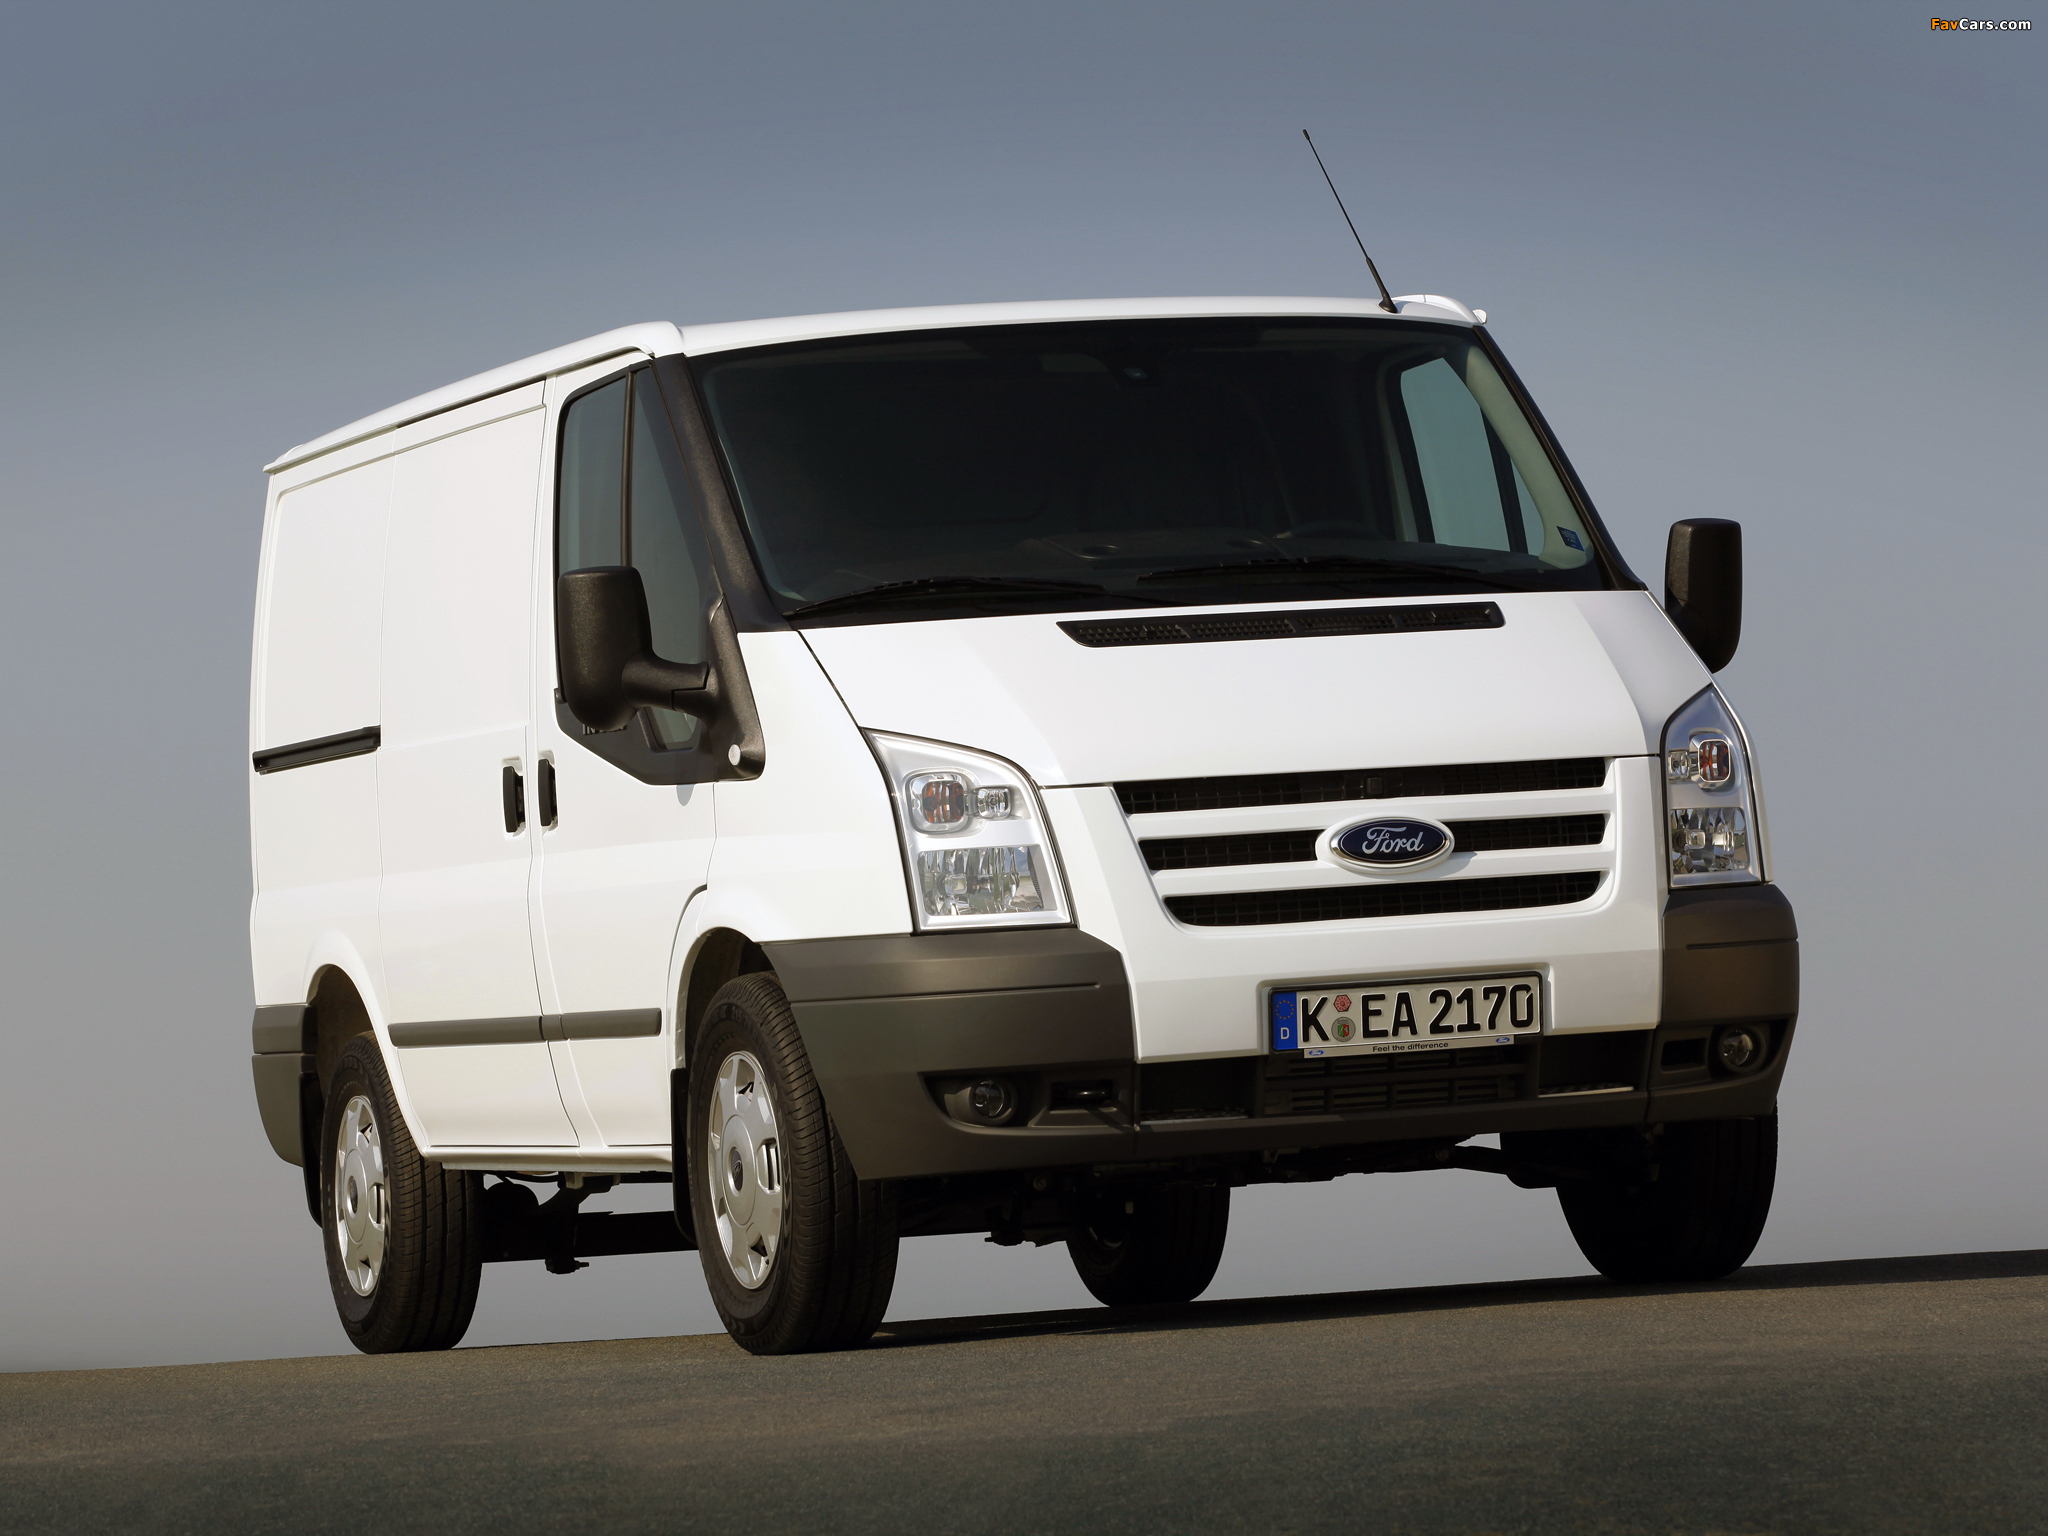 Форд транзит 2006 2014. Ford Transit 2006. Ford Transit 2006 2.2. Ford Transit LWB van 2006. Ford Transit SWB.